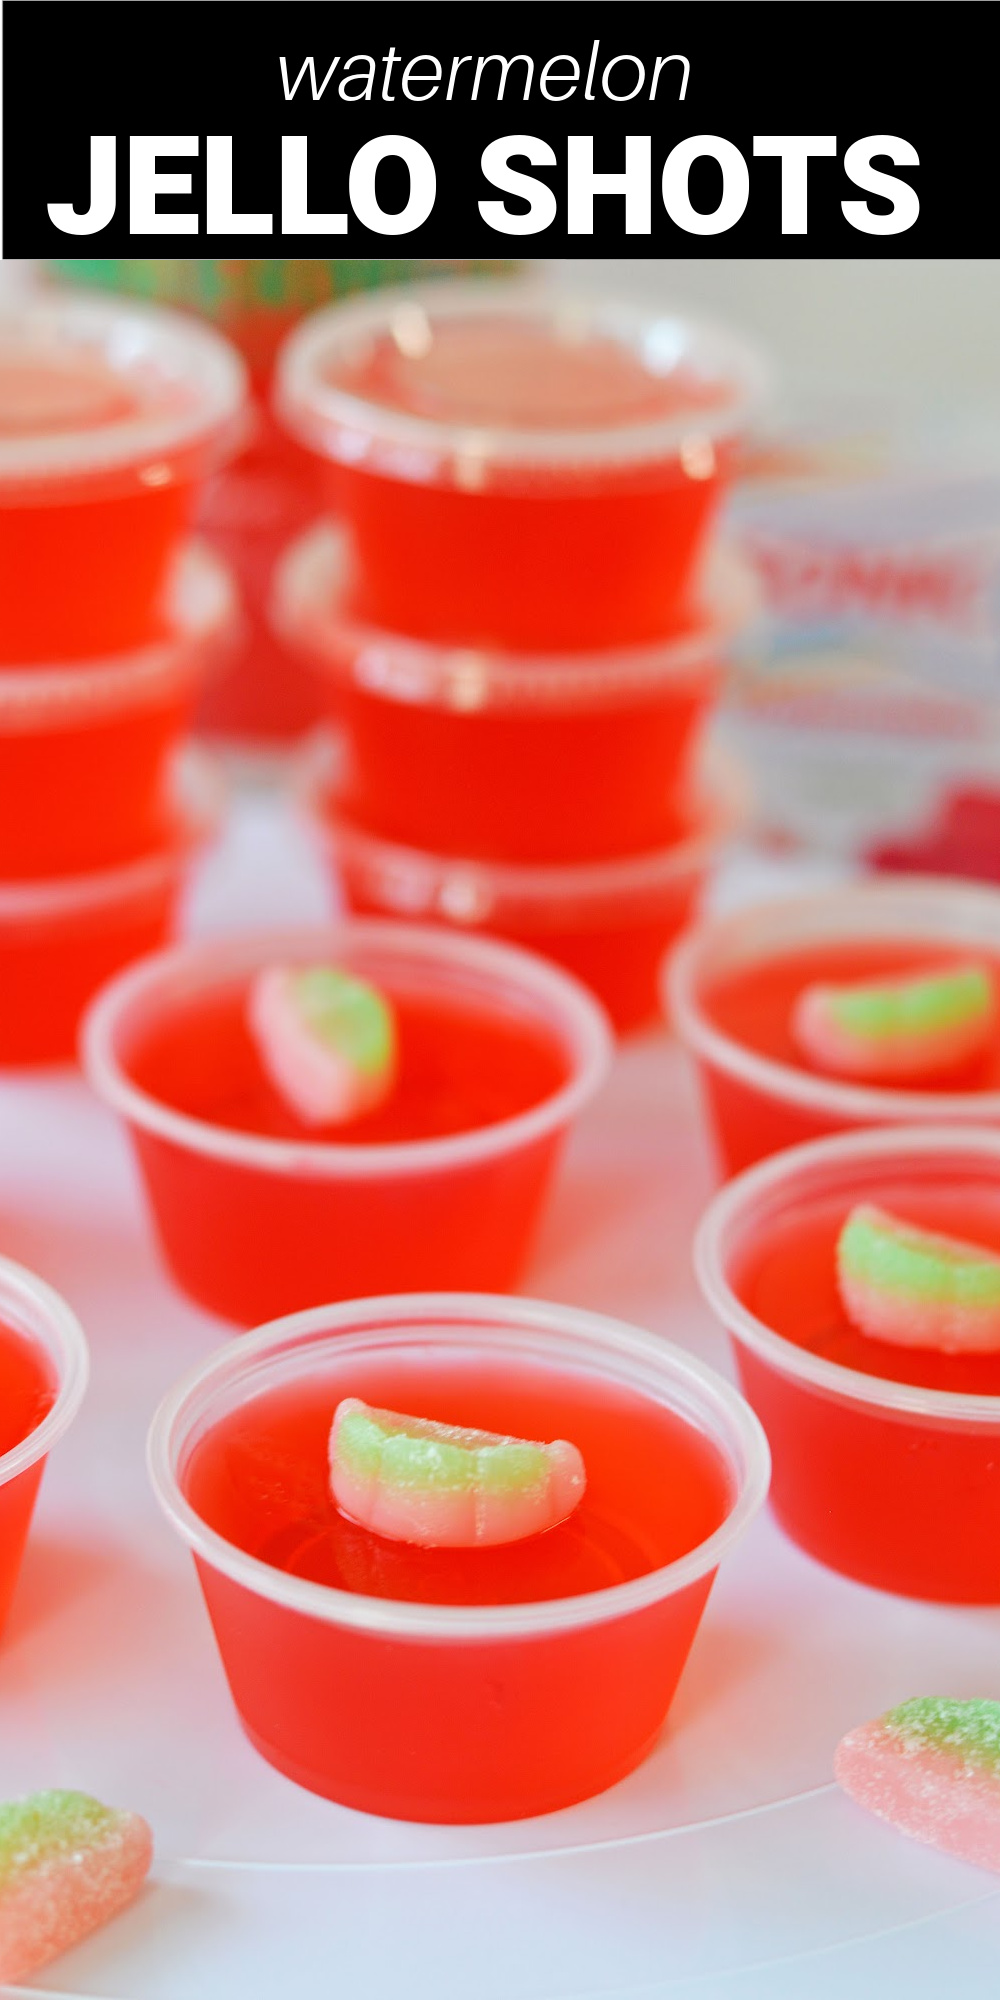 watermelon-flavored gelatin and vodka and topped with a cute watermelon sour candy, this is a treat the adults will love all summer long. Make a kid-friendly version without the alcohol so they can join in the fun too.